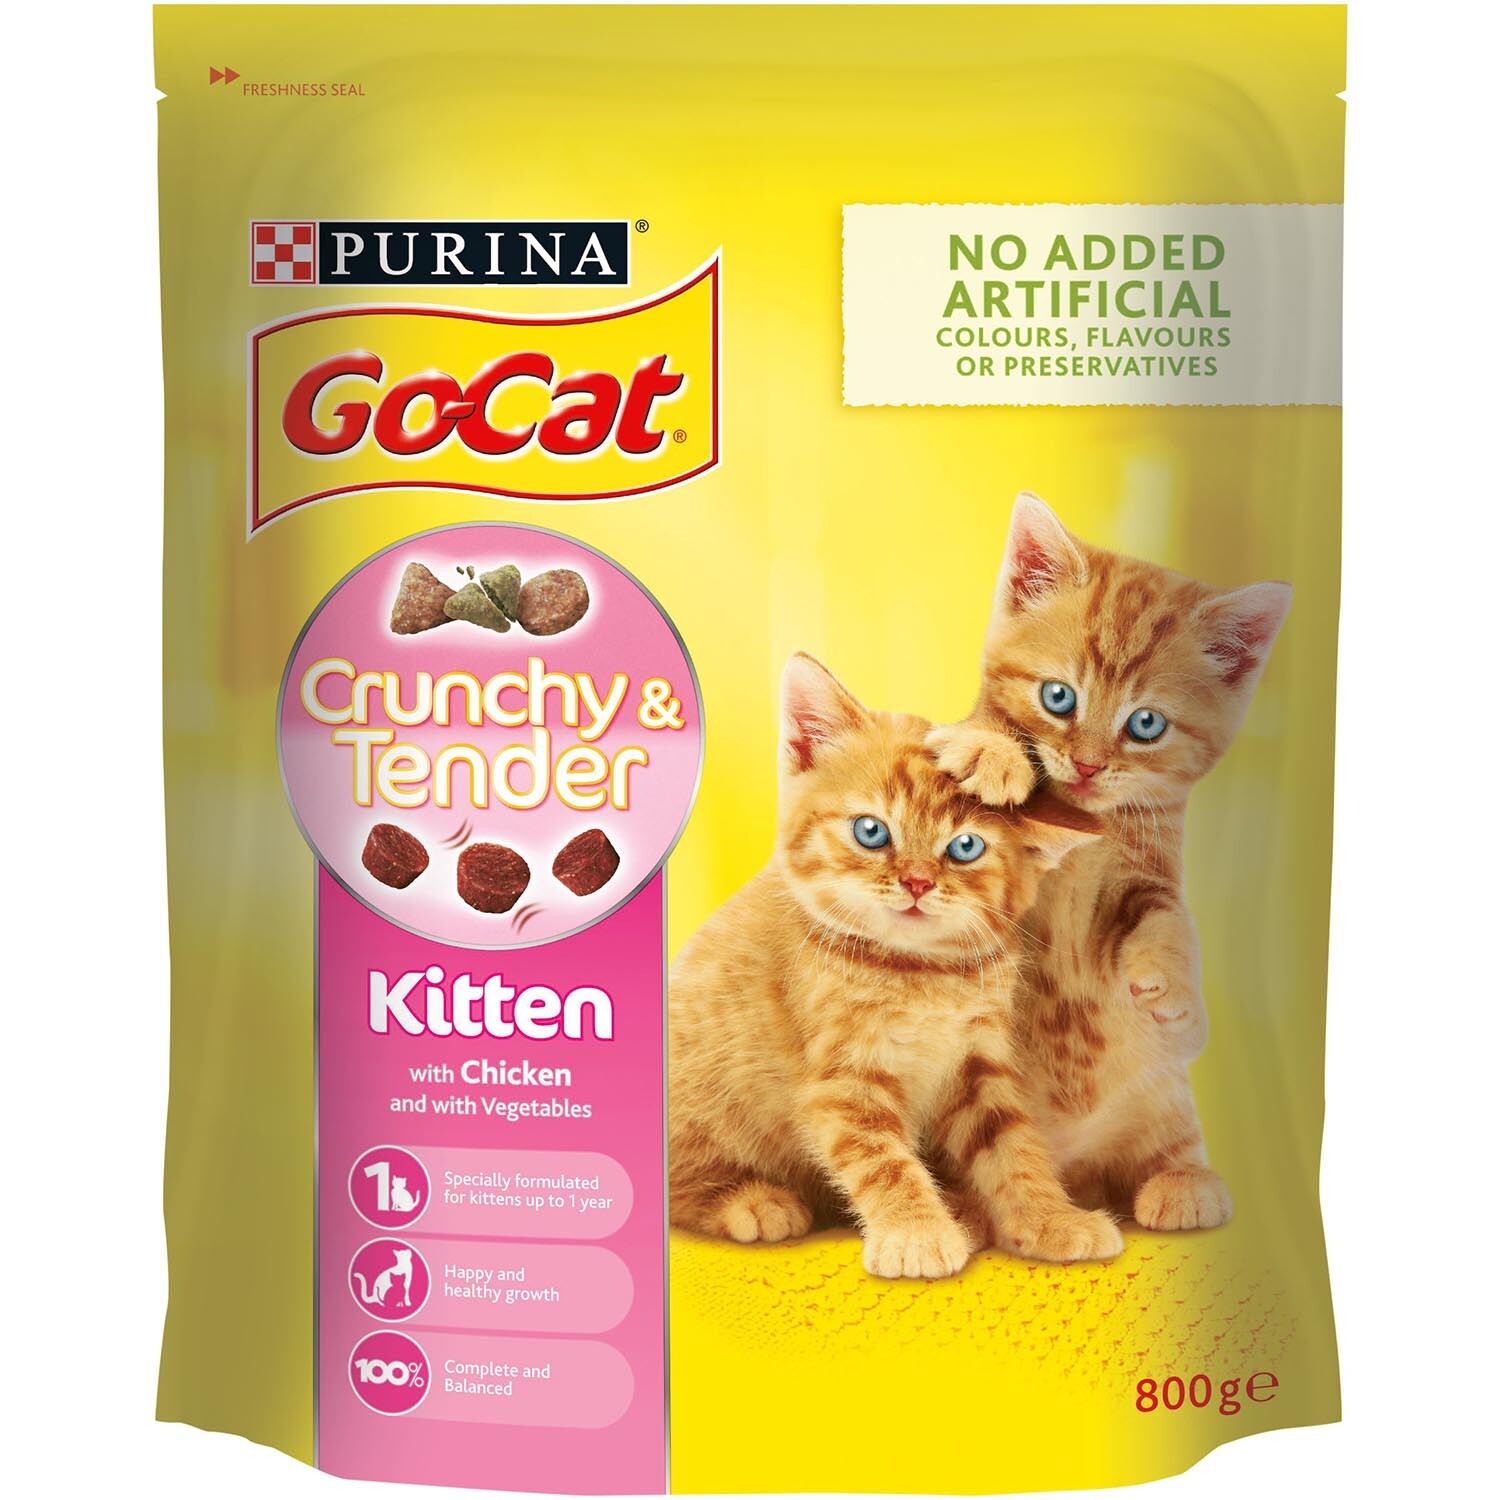 Purina Go Cat Crunchy and Tender Chicken and Vegetables Kitten Food 800g Image 1